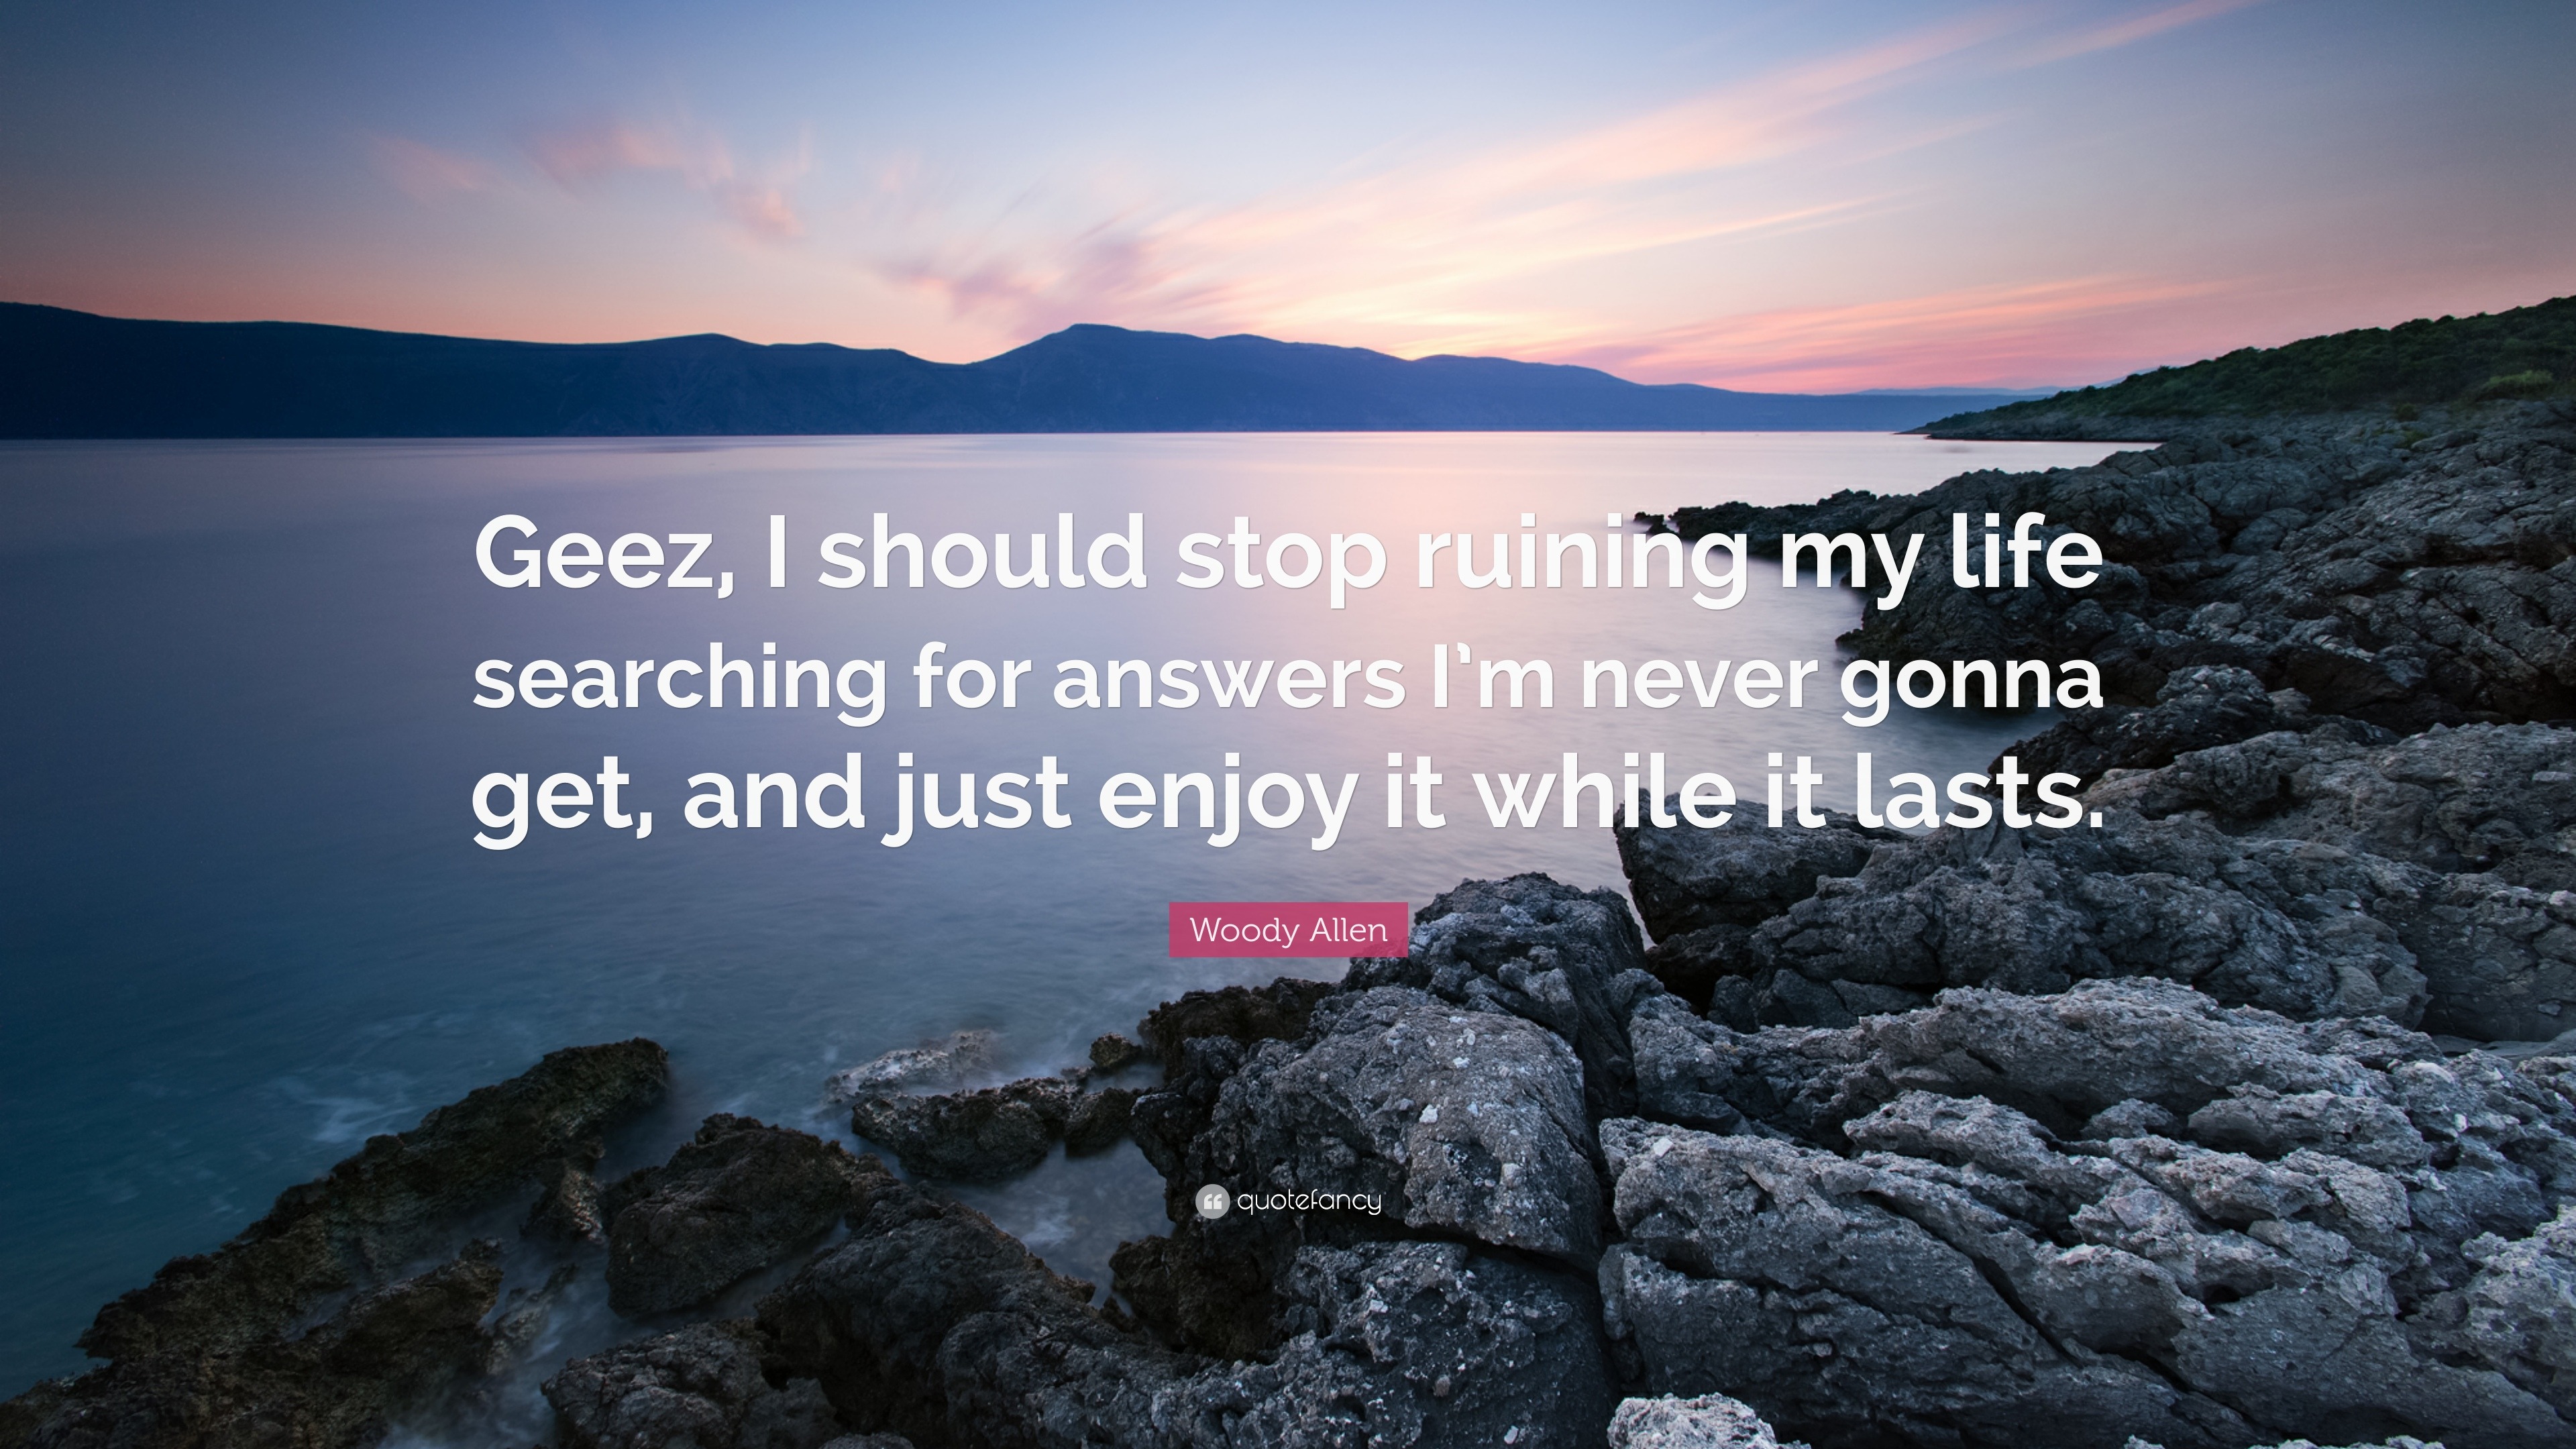 Woody Allen Quote “Geez I should stop ruining my life searching for answers